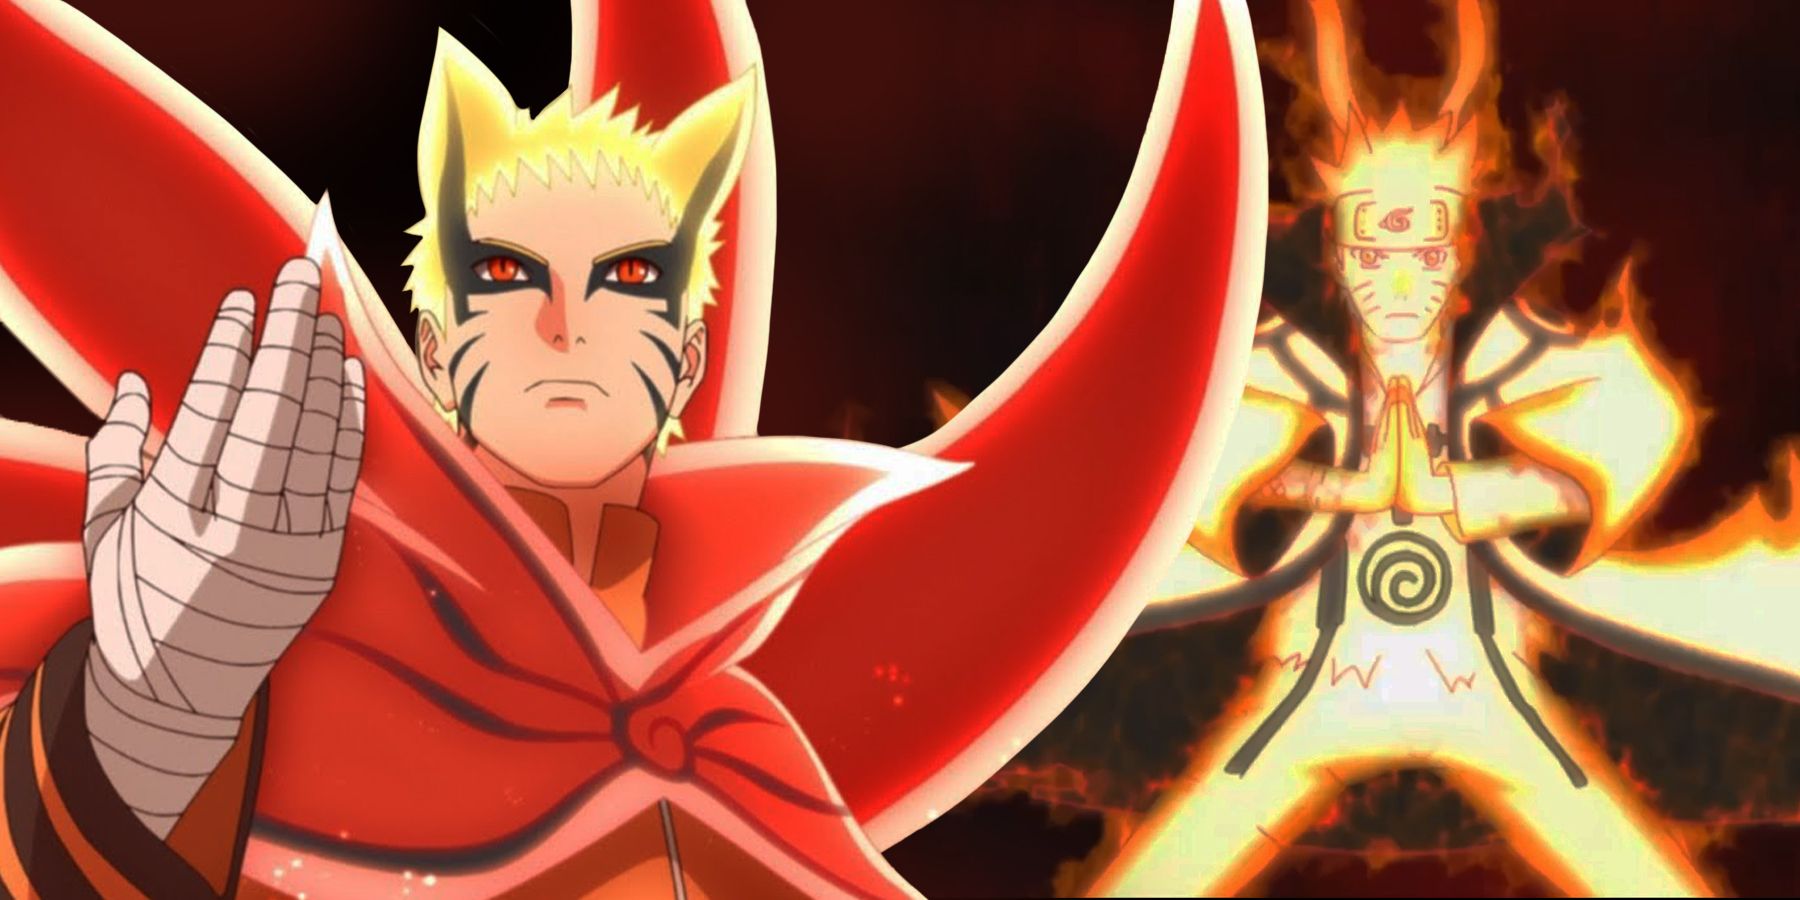 Naruto in his Nine Tails Chakra mode and Baryon mode from the anime Naruto